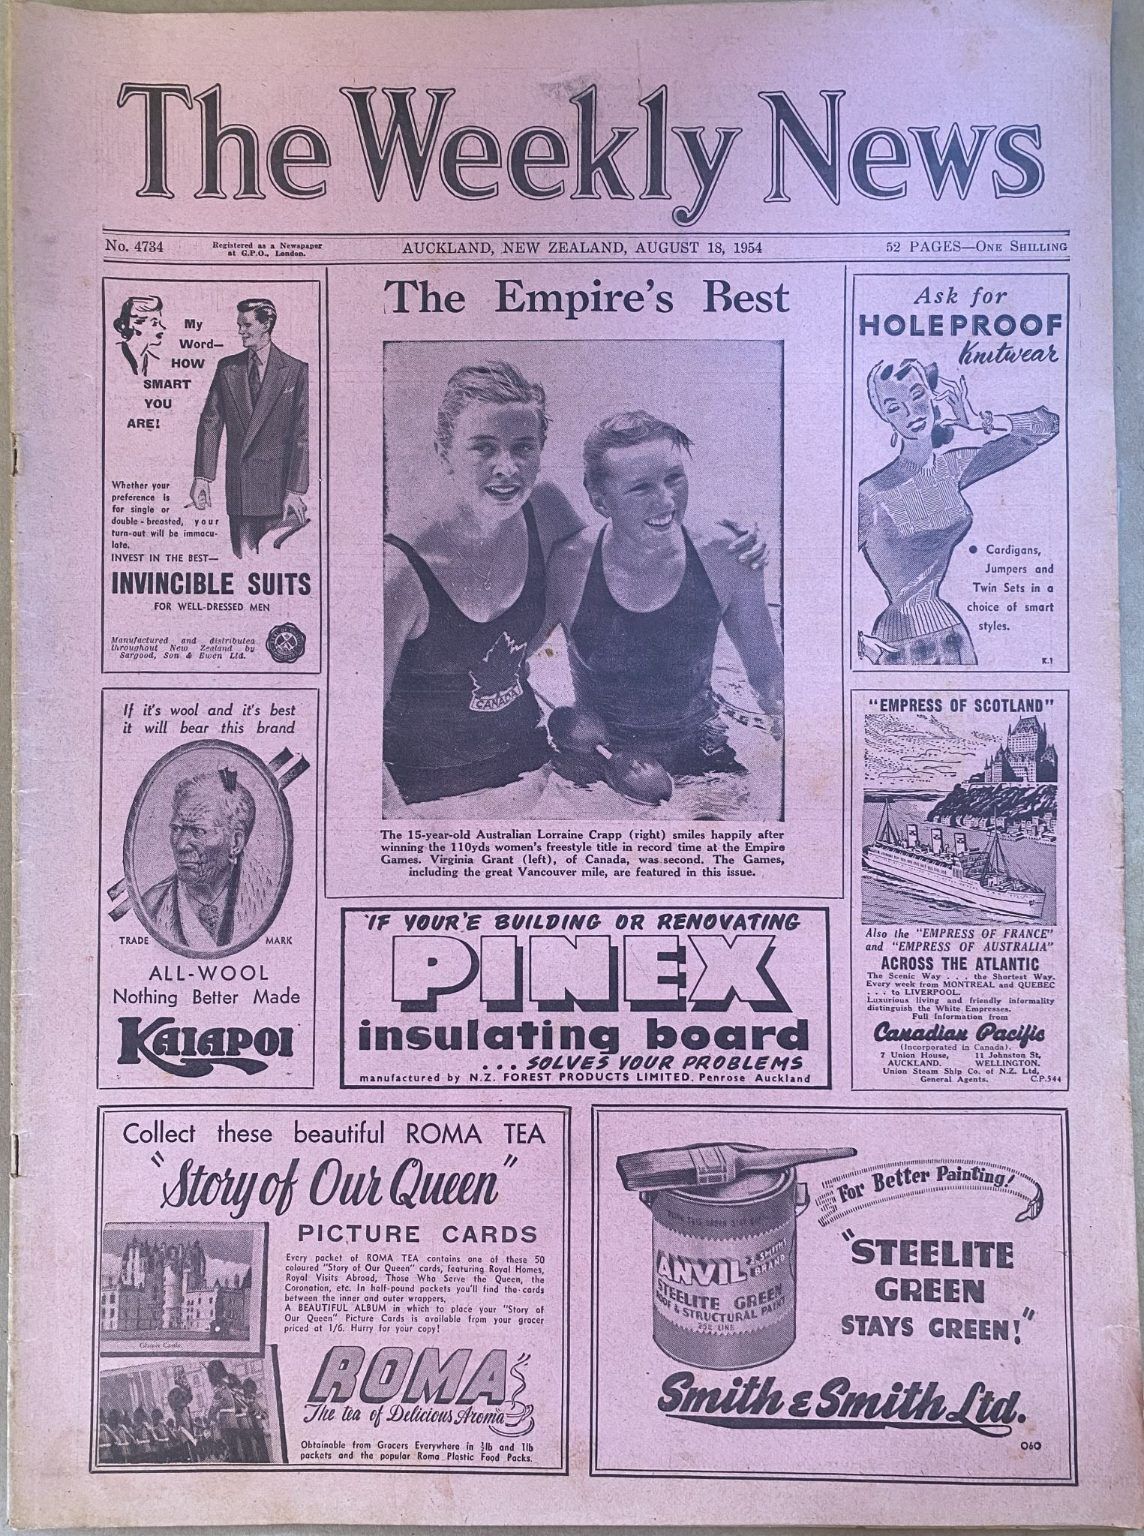 OLD NEWSPAPER: The Weekly News - No. 4734, 18 August 1954